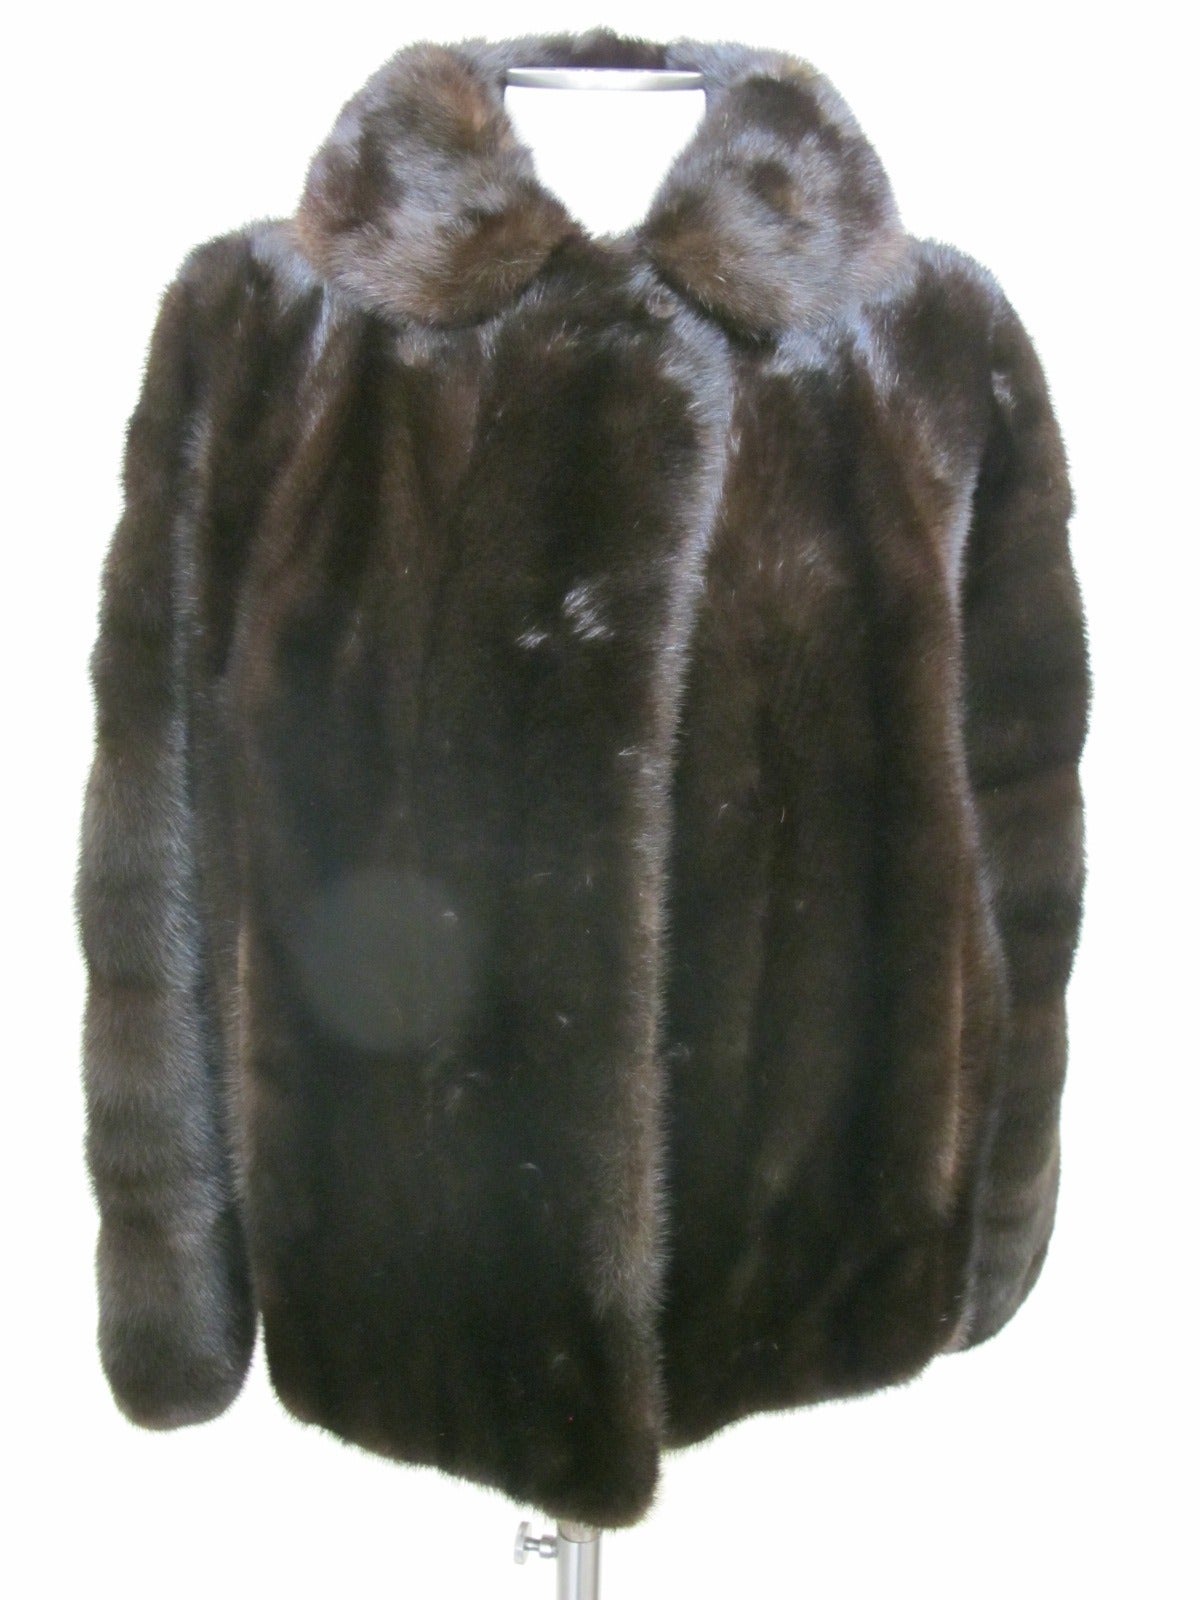 Women's Ranch Mink Open Jacket With Pockets For Sale